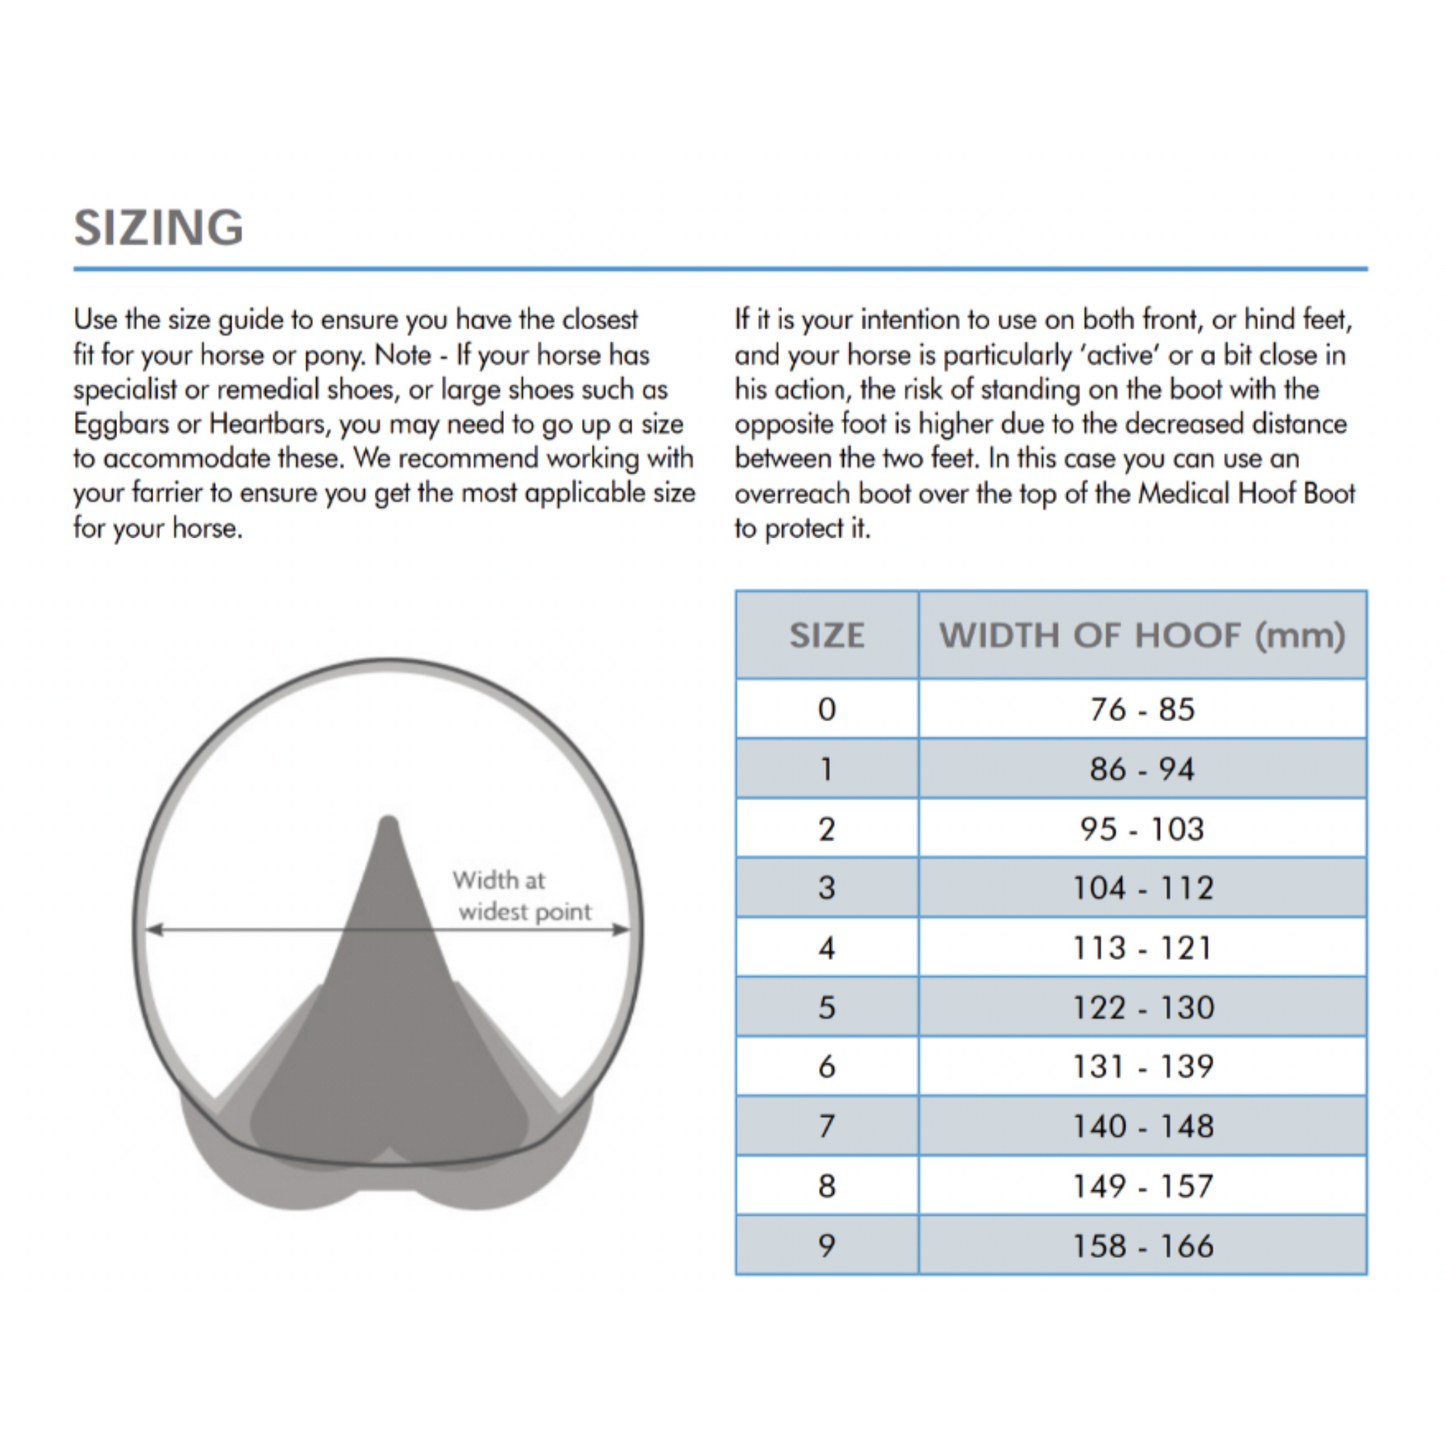 Alt text: A sizing guide for horse hoof boots shows a hoof measurement diagram and a table listing hoof width in millimeters for sizes 0 through 9.